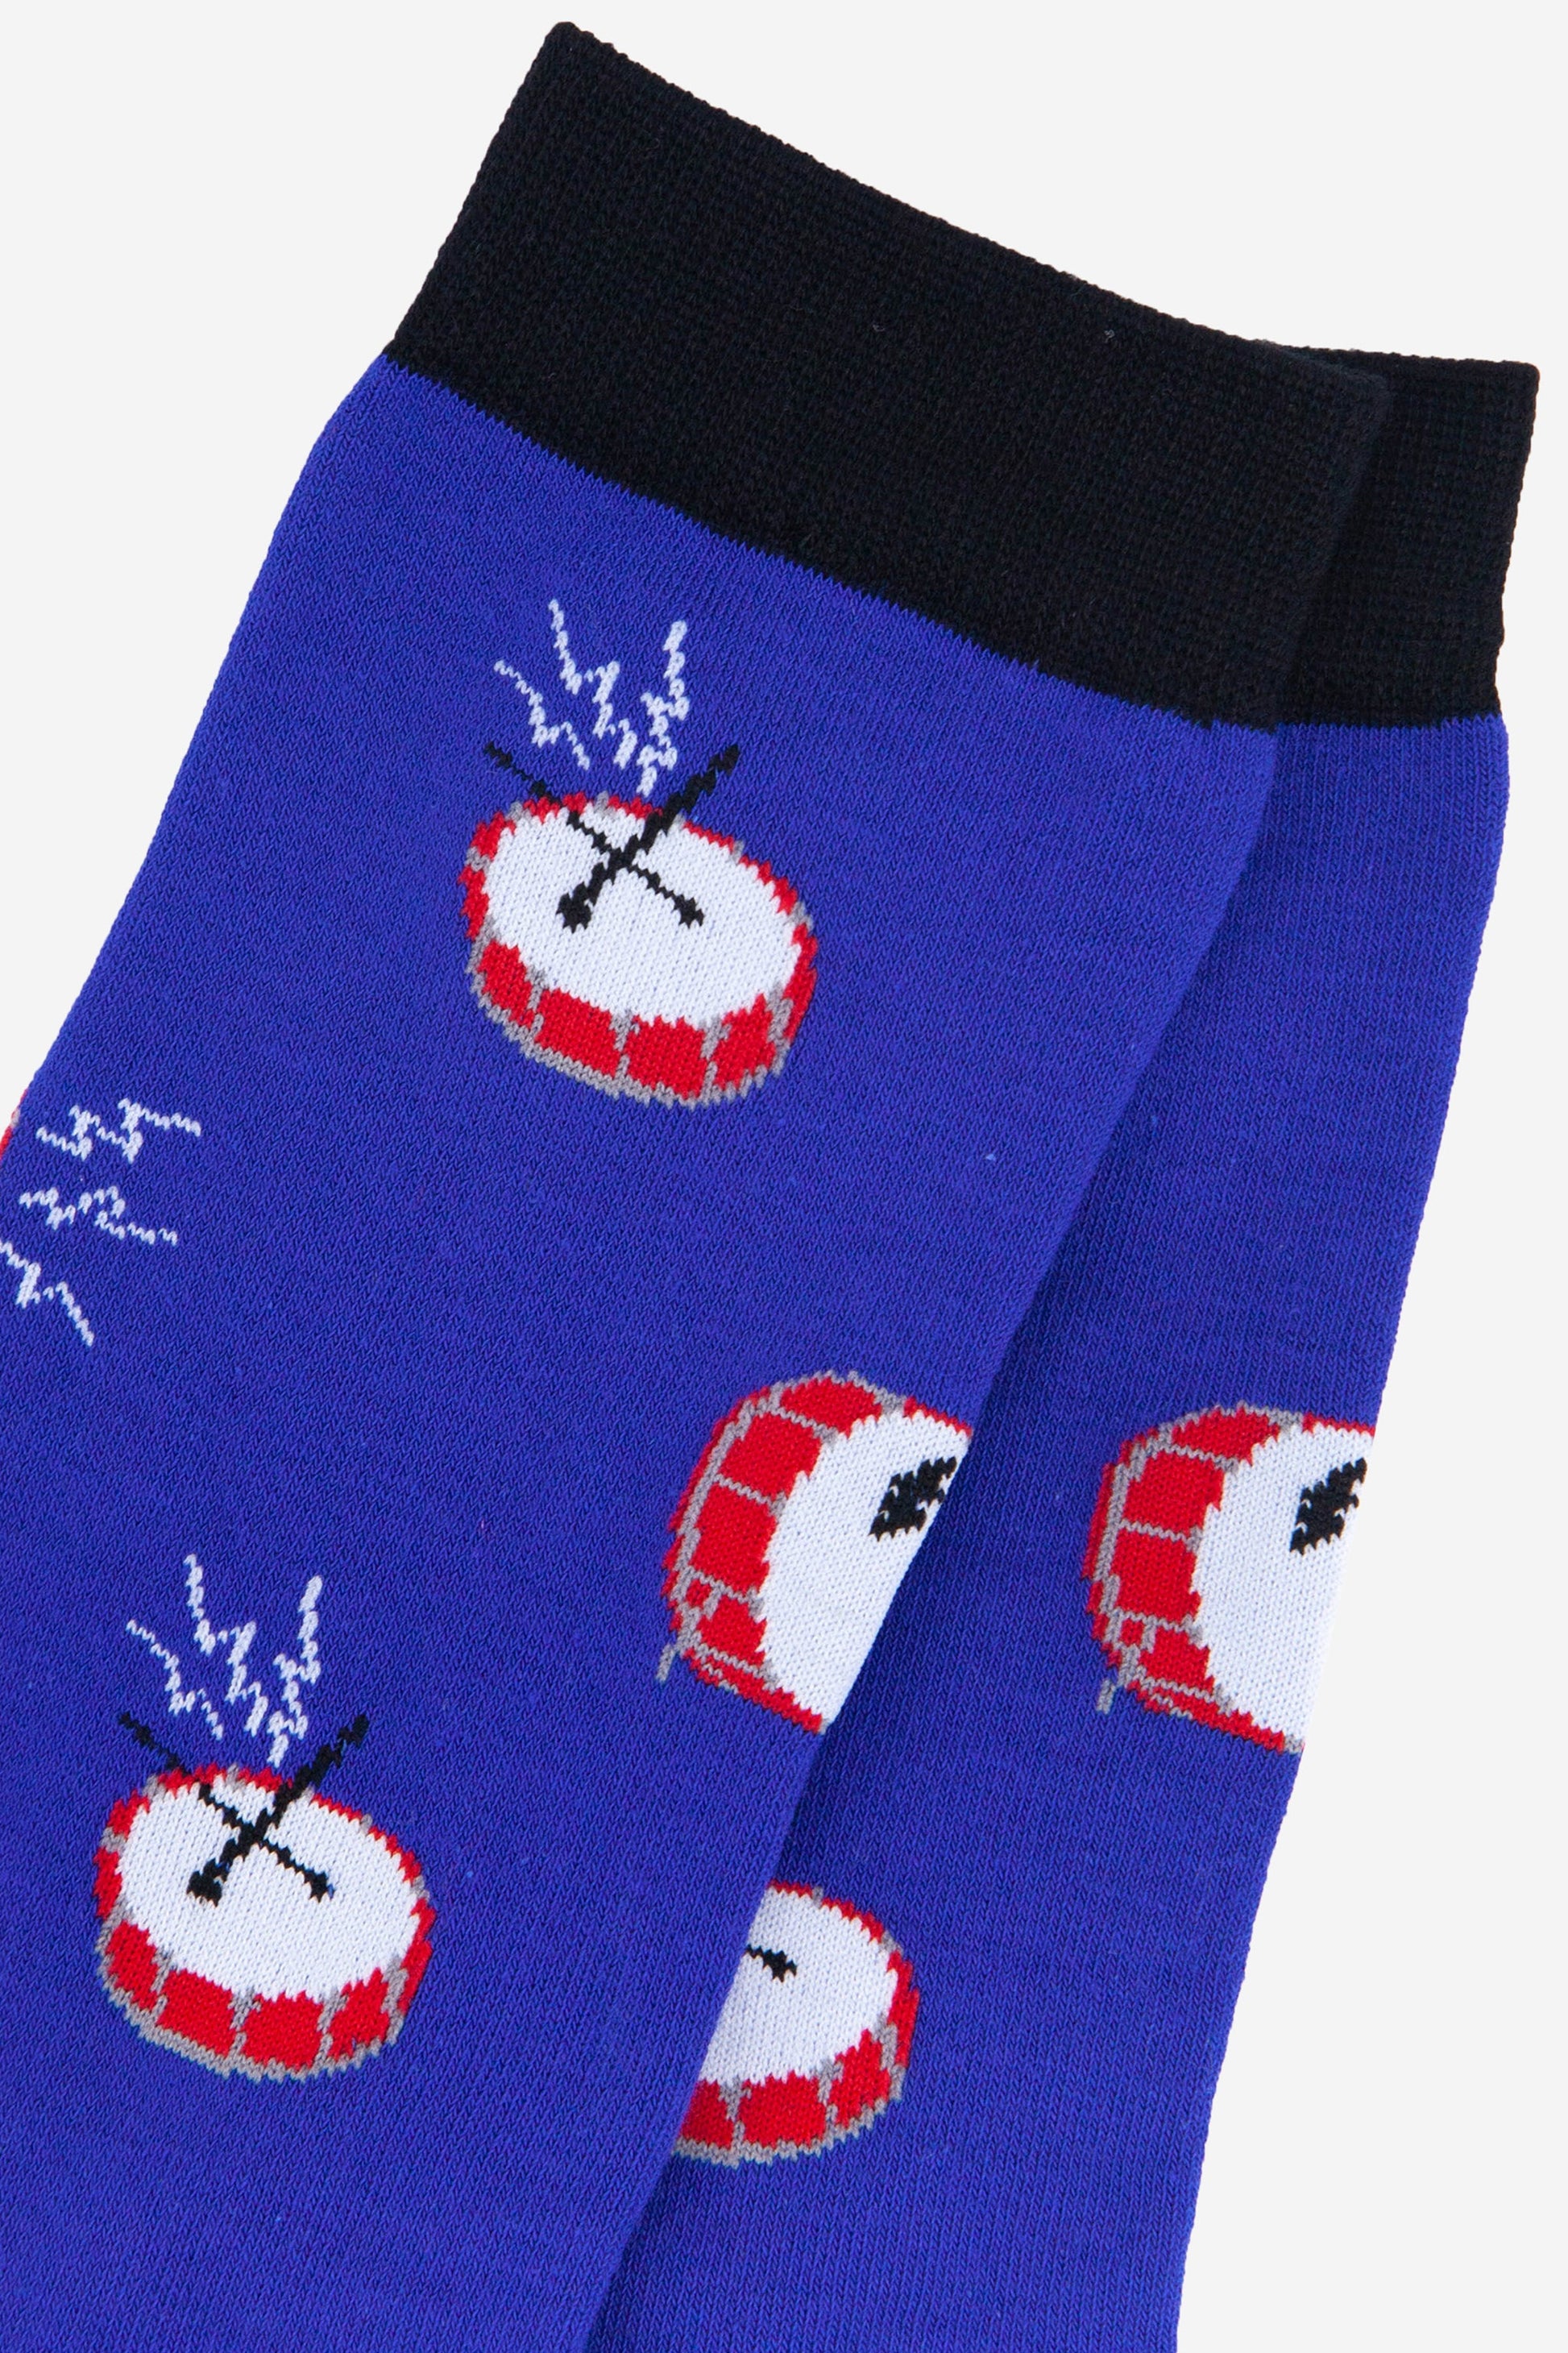 close up of the drum pattern on the blue bamboo dress socks